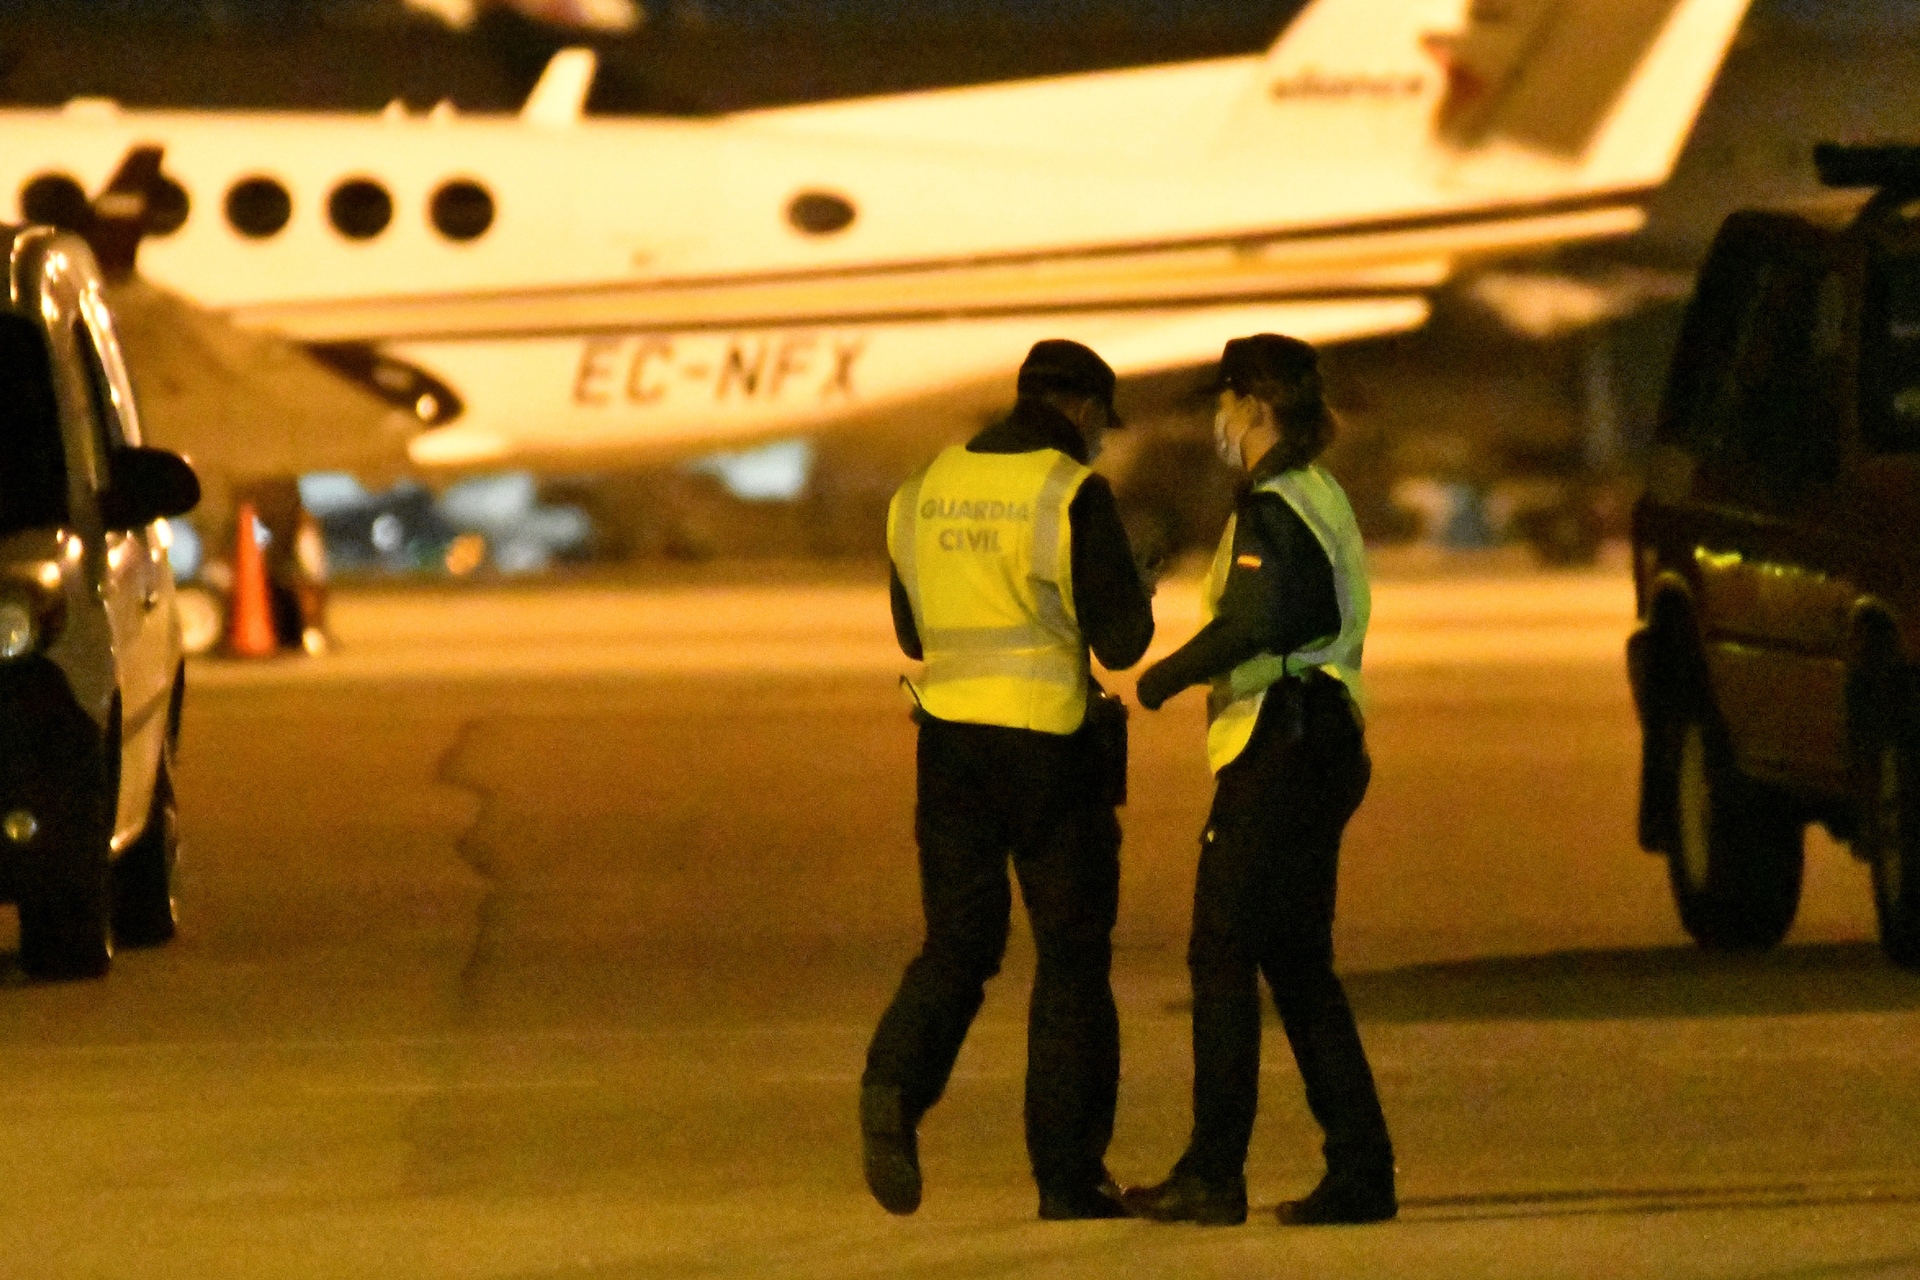 Around 20 Moroccans Arrive In Mallorca Following A Faked Aircraft Emergency